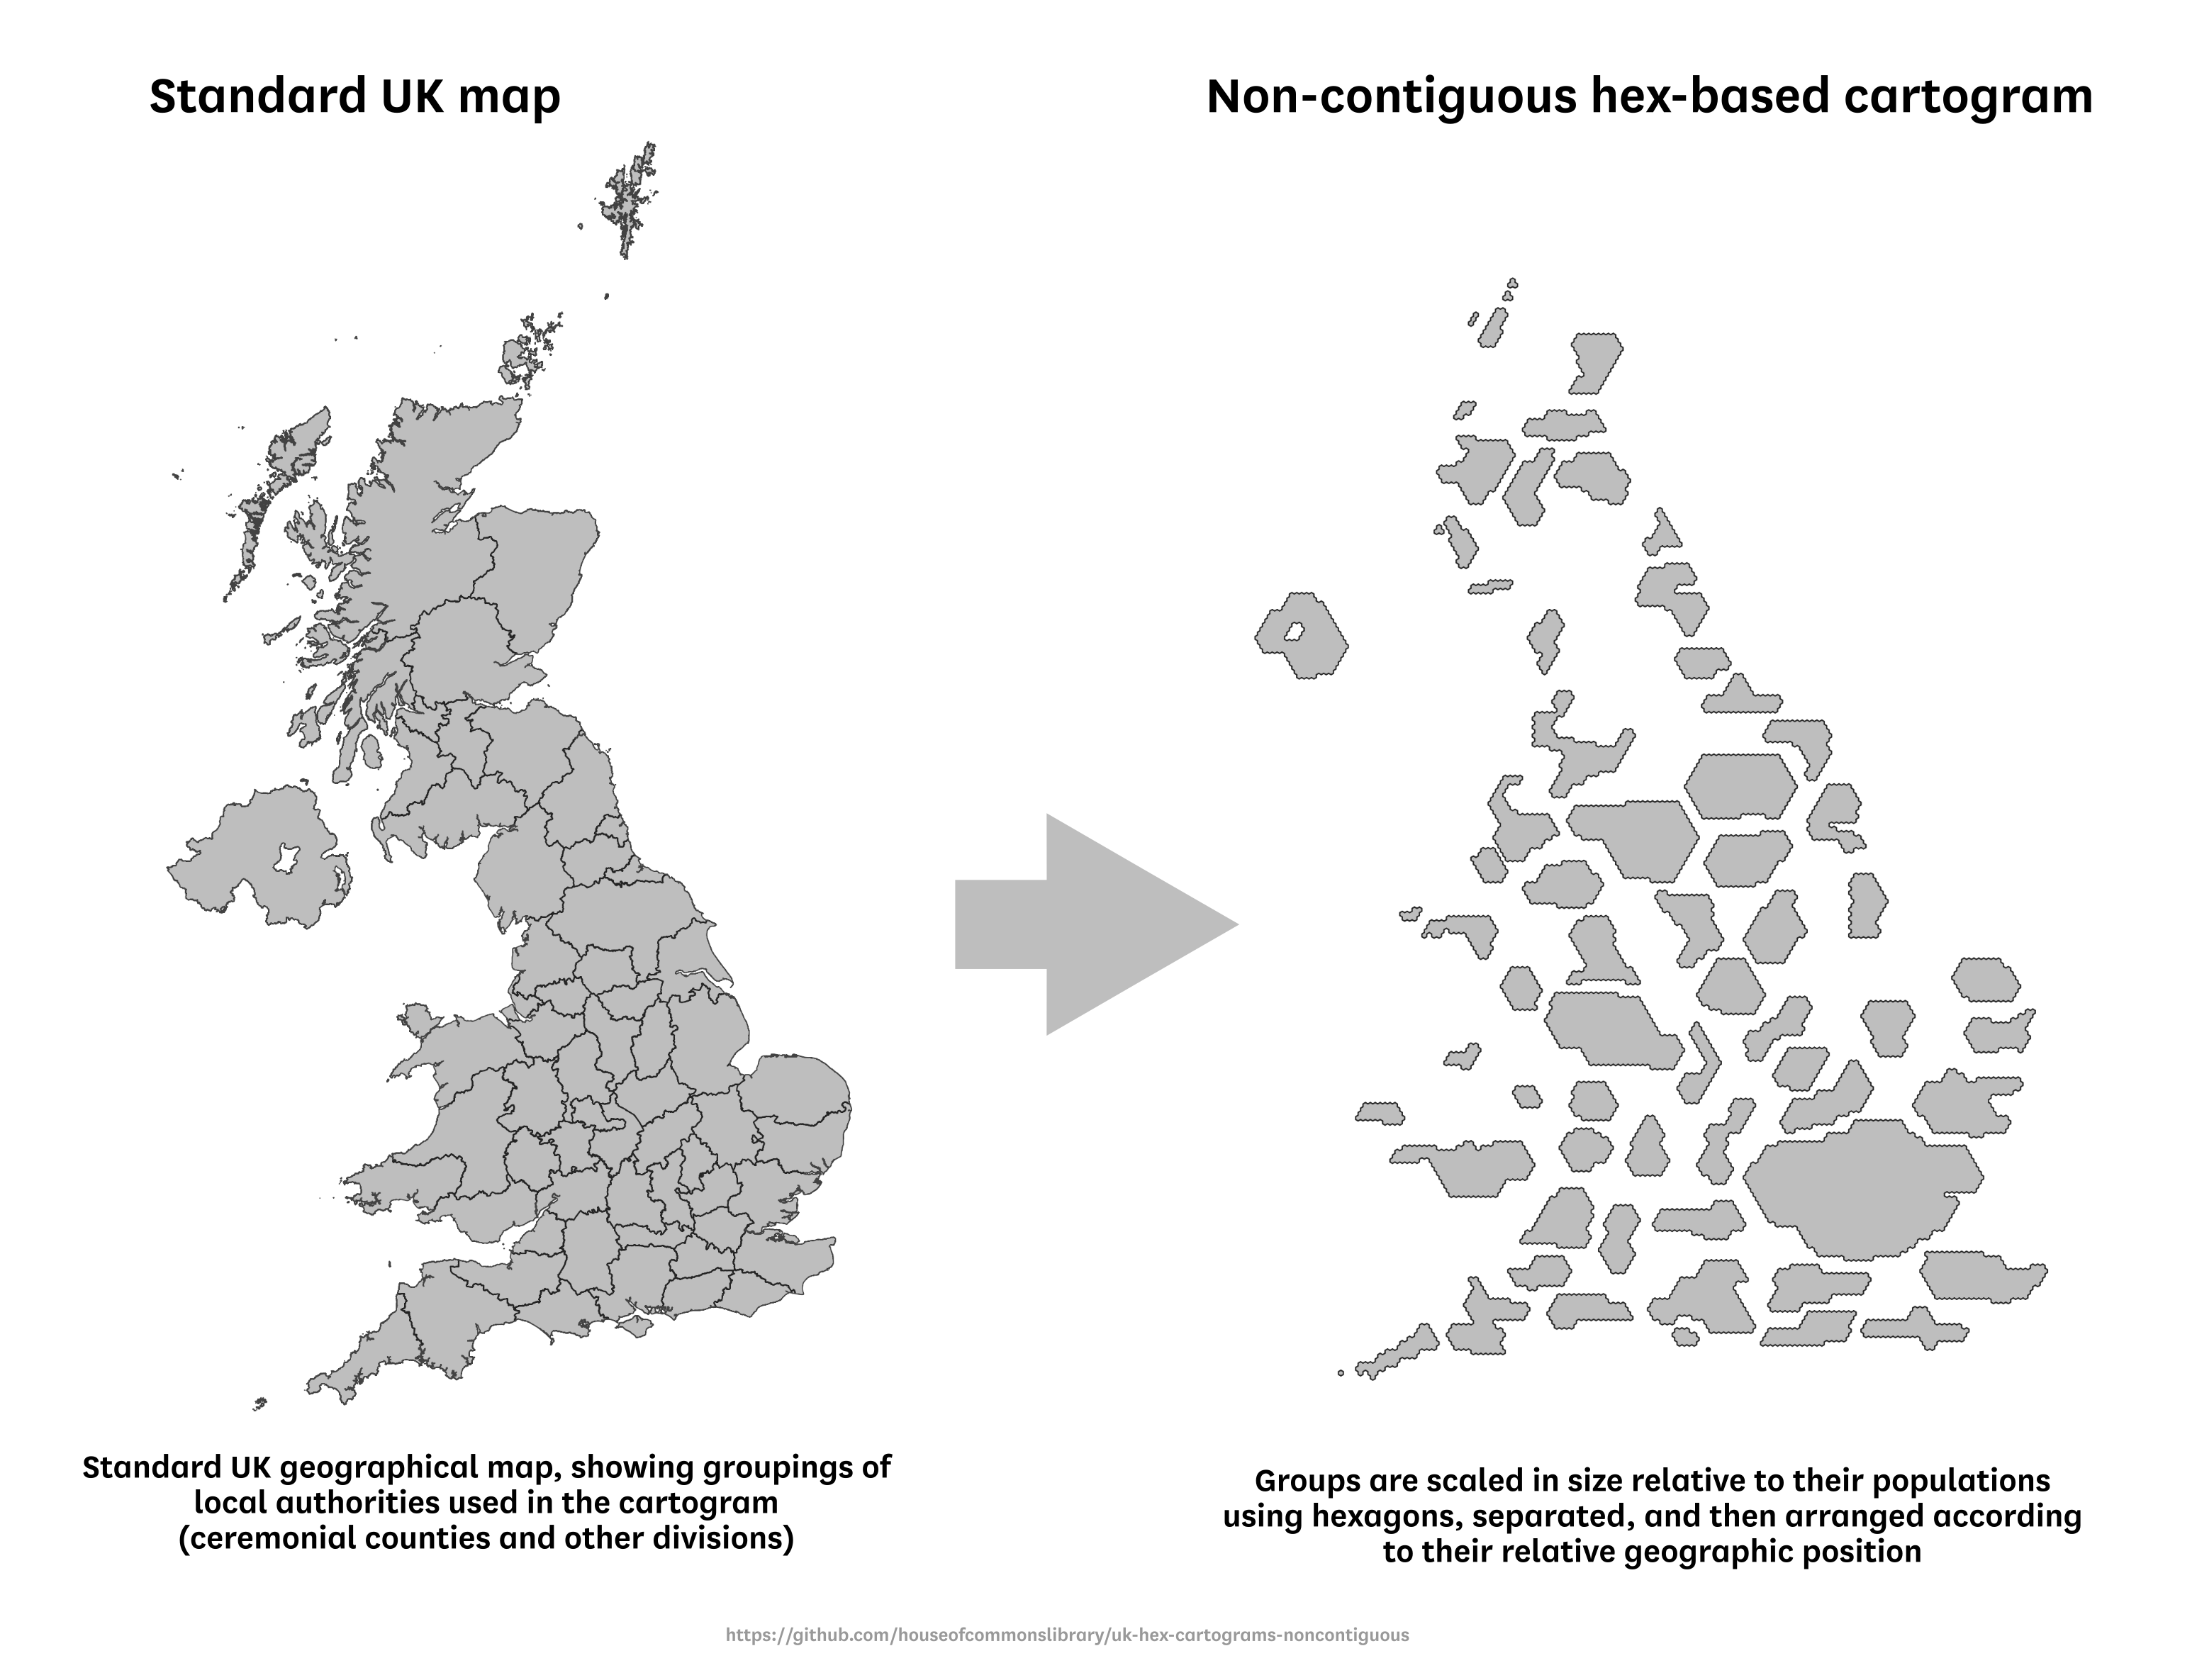 The transition between a geographical map grouped by county, and the non-contiguous UK cartogram